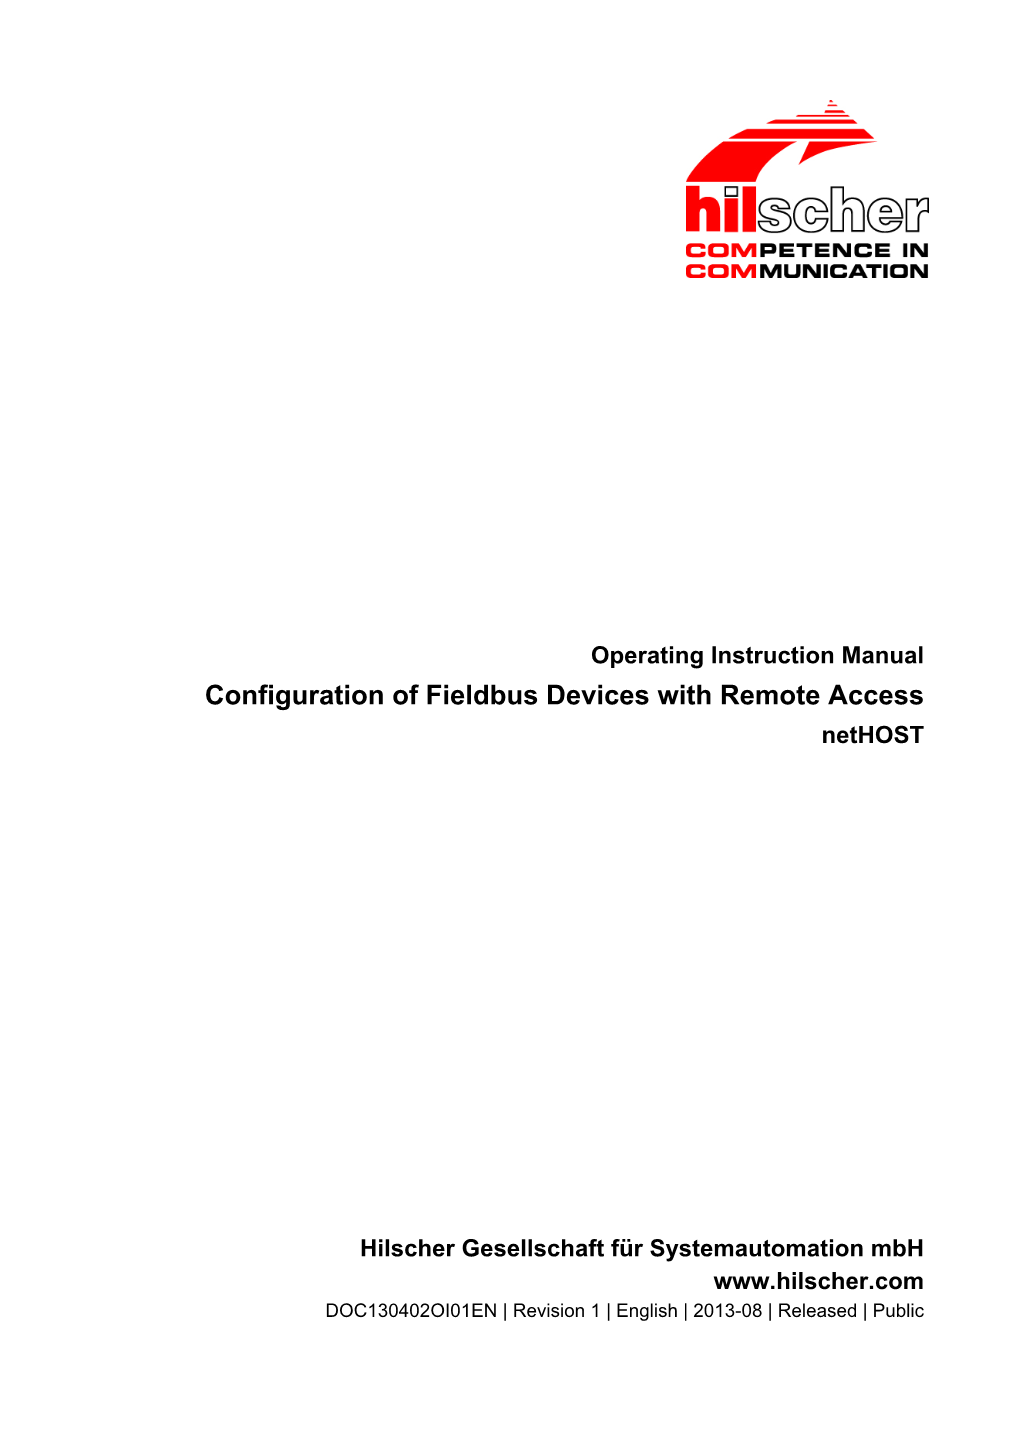 Configuration of Fieldbus Devices with Remote Access Nethost